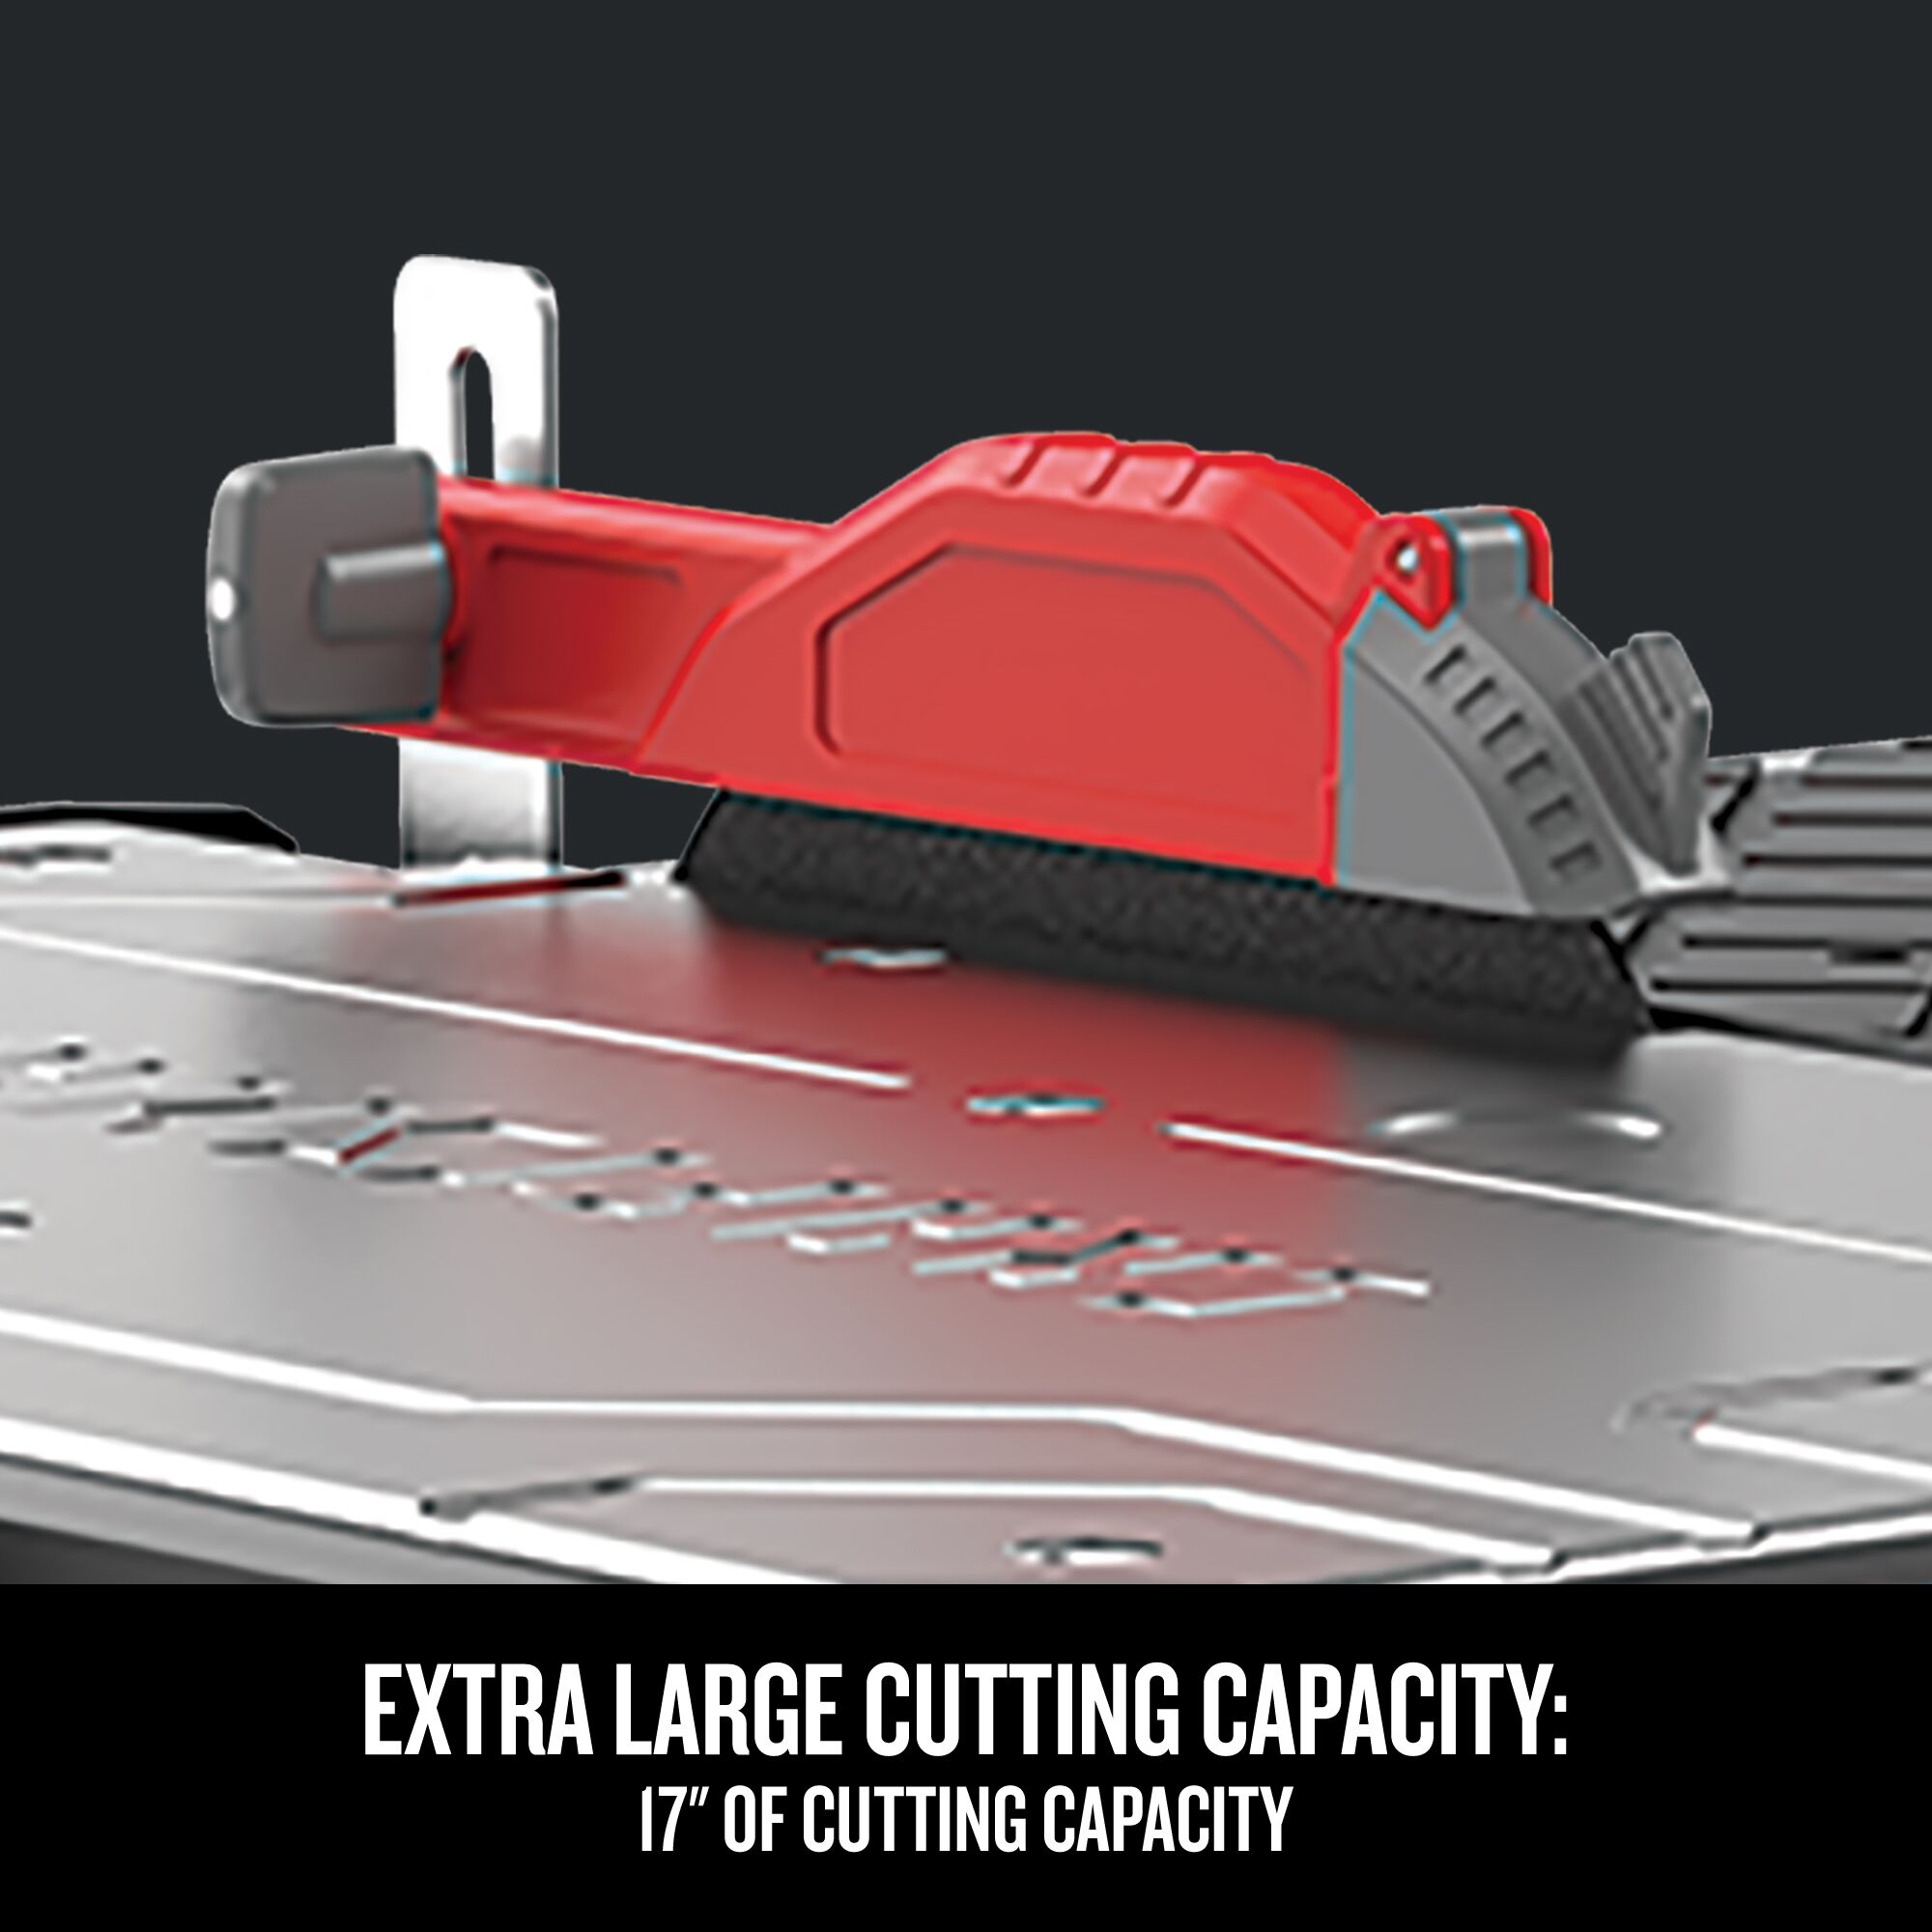 Graphic of CRAFTSMAN Tile Saw highlighting product features